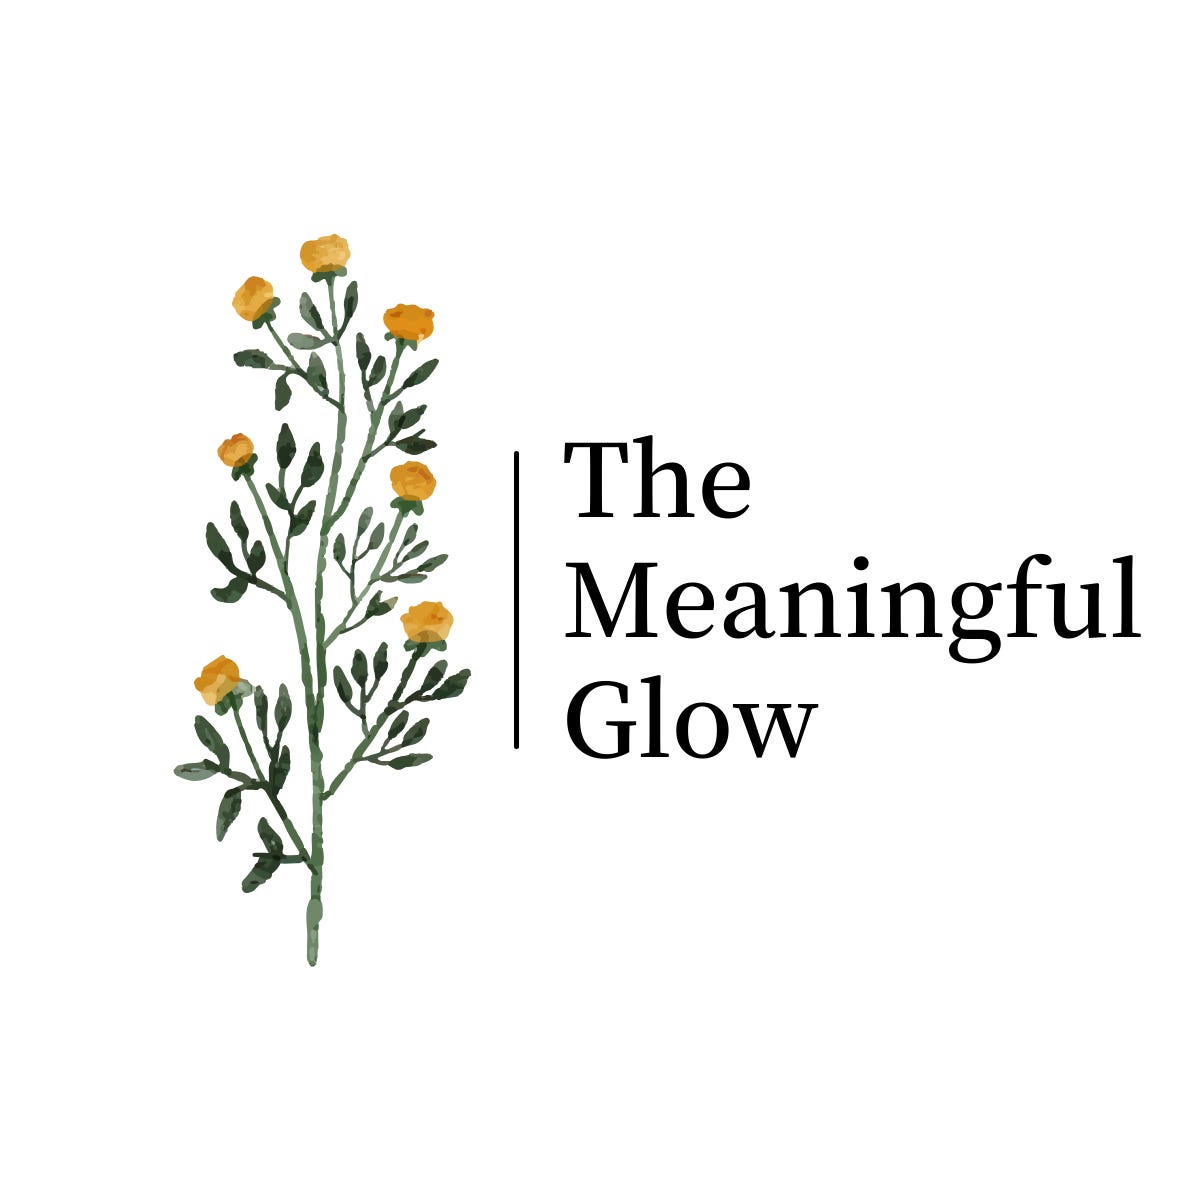 The Meaningful Glow